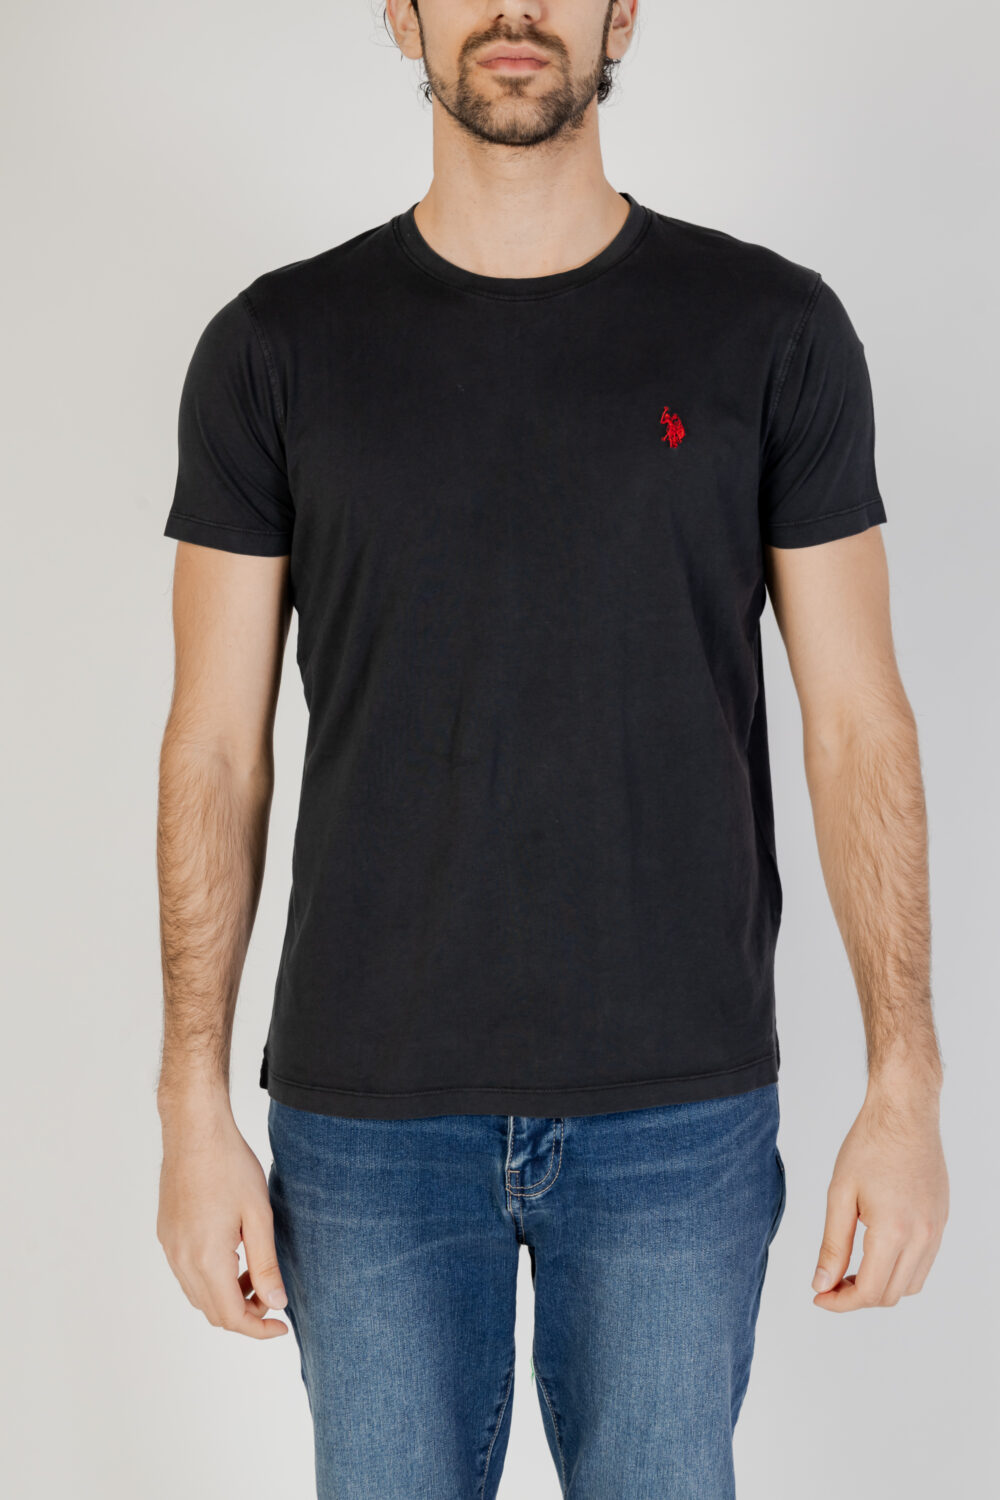 T-shirt U.S. Polo Assn. FABY Antracite - Foto 4